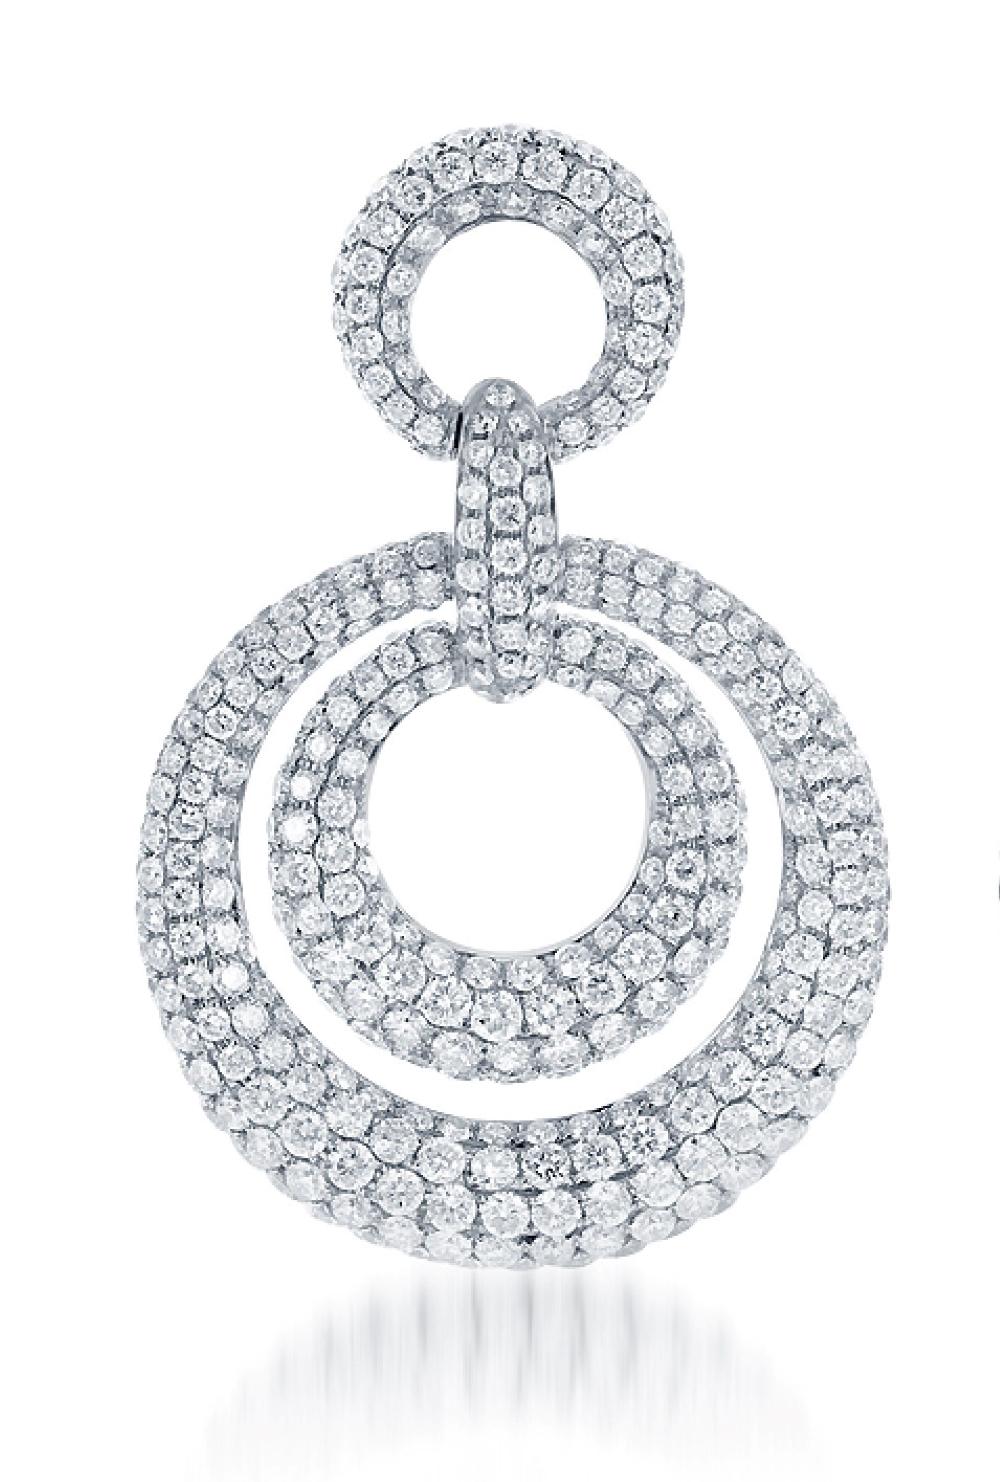 Incredible drop style earrings with a pattern of concentric circles intertwined. The pave setting style is made of of entirely round brilliant cut diamonds that total 8.73ct. These are crafted in 18kt white gold. Dazzling brilliance from every angle